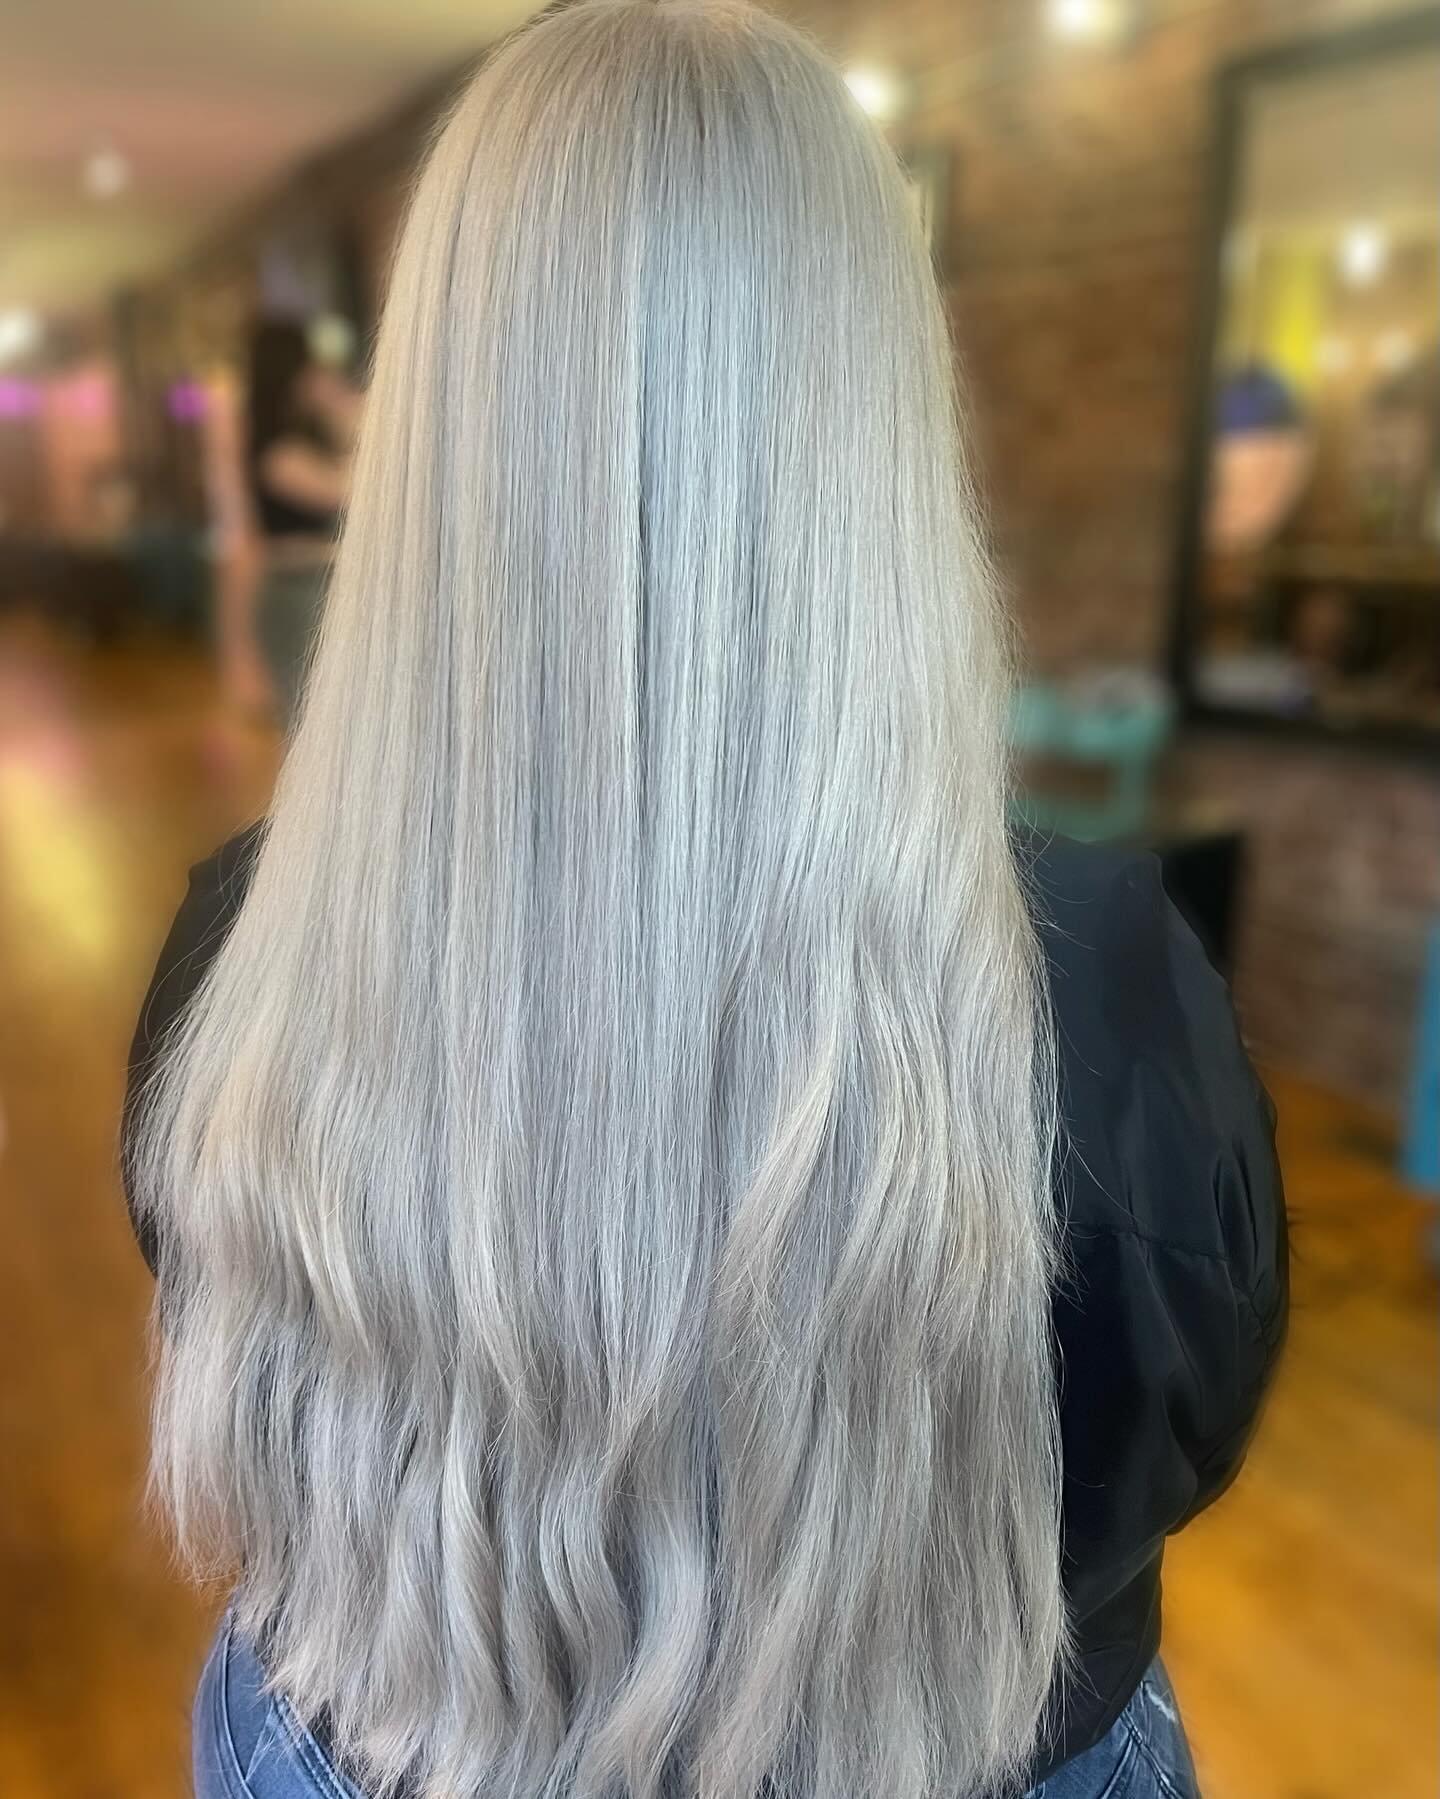 As the wise DJ Khalid said&hellip; &ldquo;Another one&rdquo; 
Swipe for before! 
This color correction gave me a run for my money today, but the end result is *chefs kiss* 💋 

#lexingtonkentucky #lexingtonky #sharethelex #colortransformation #blonde